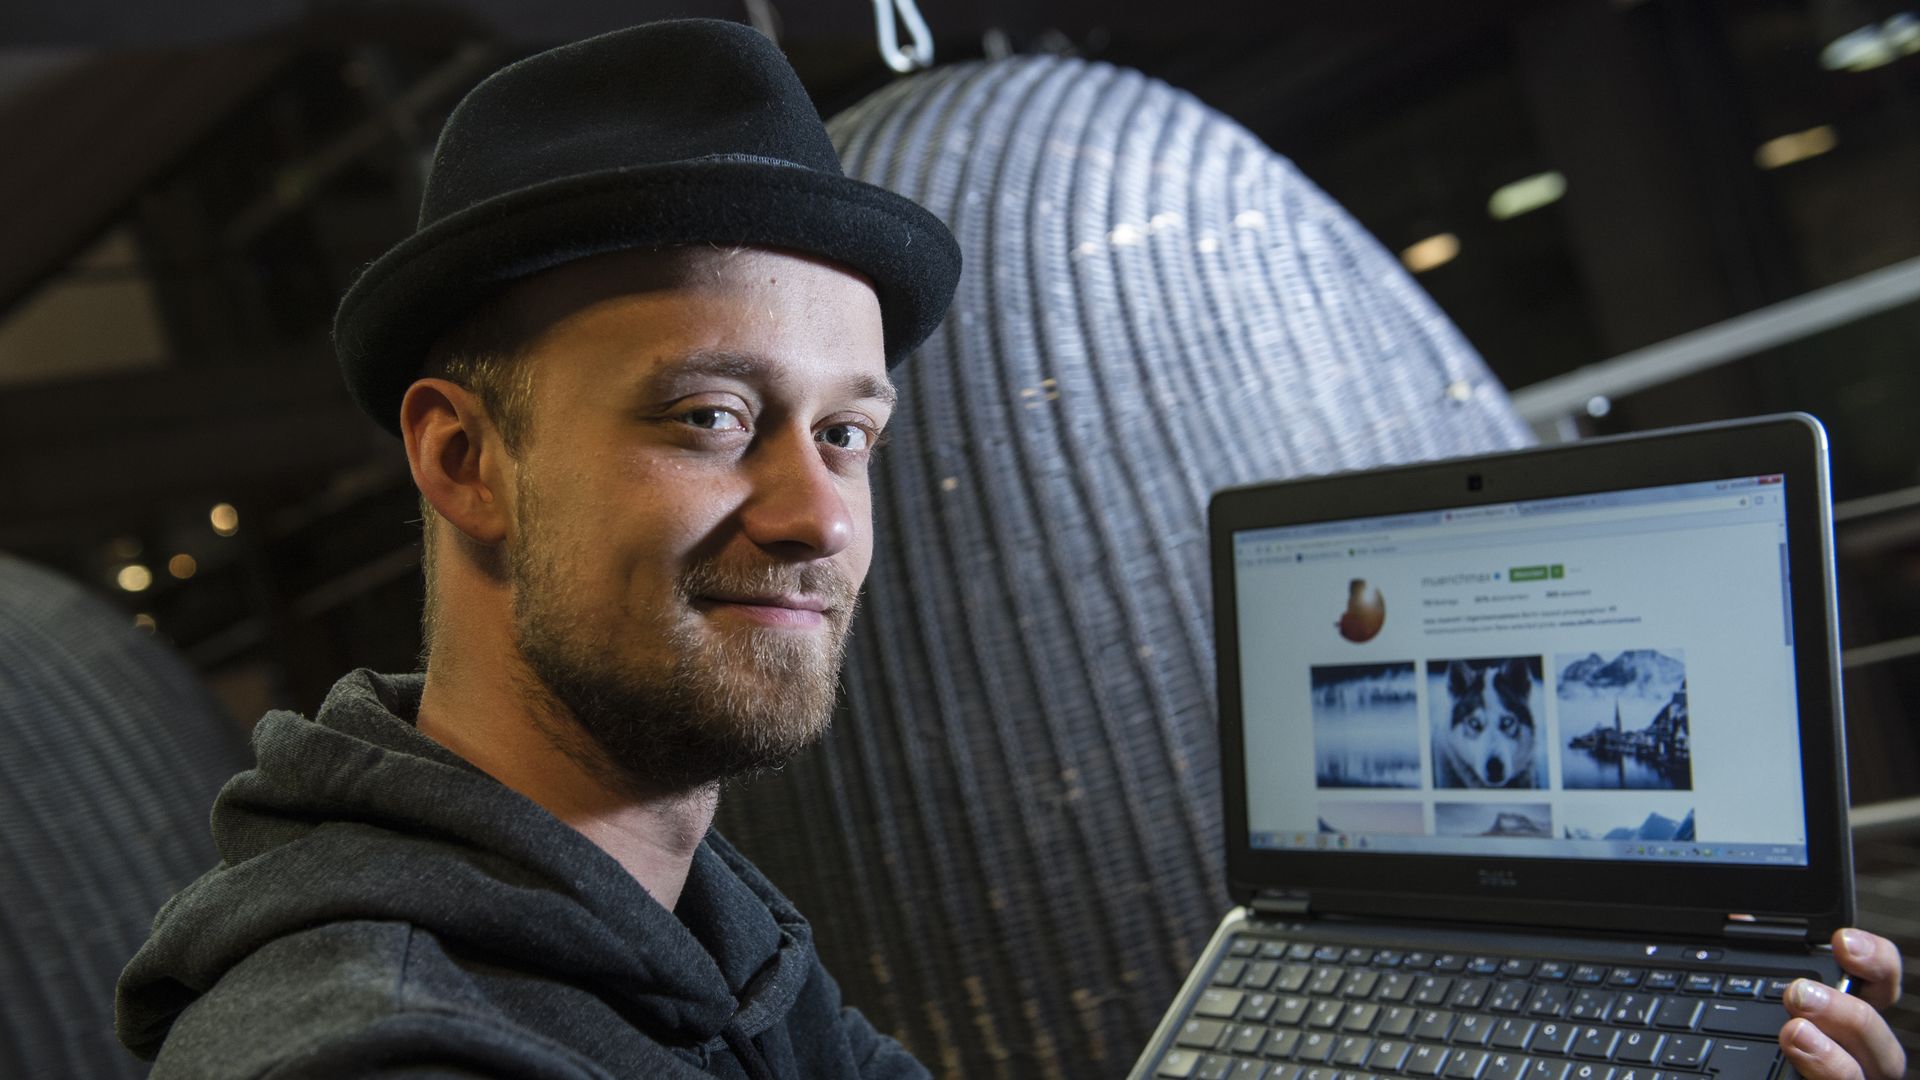 A man in a fedora shows off a laptop that's open to Instagram